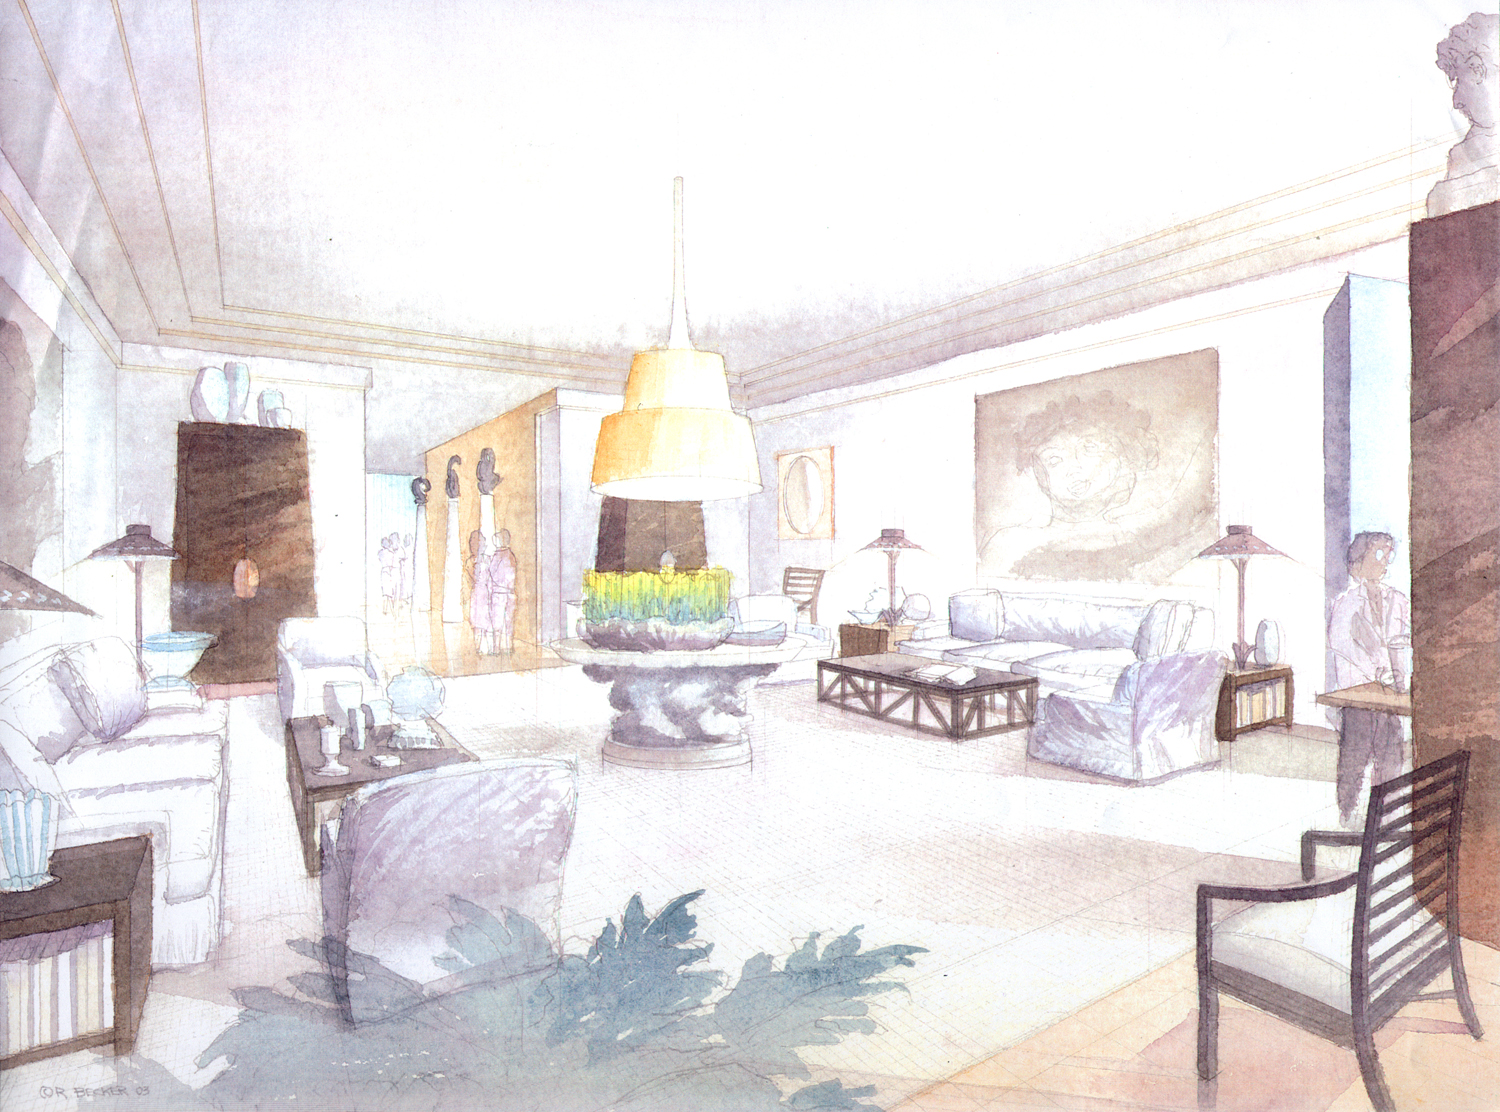 ODA one central park watercolor rendering